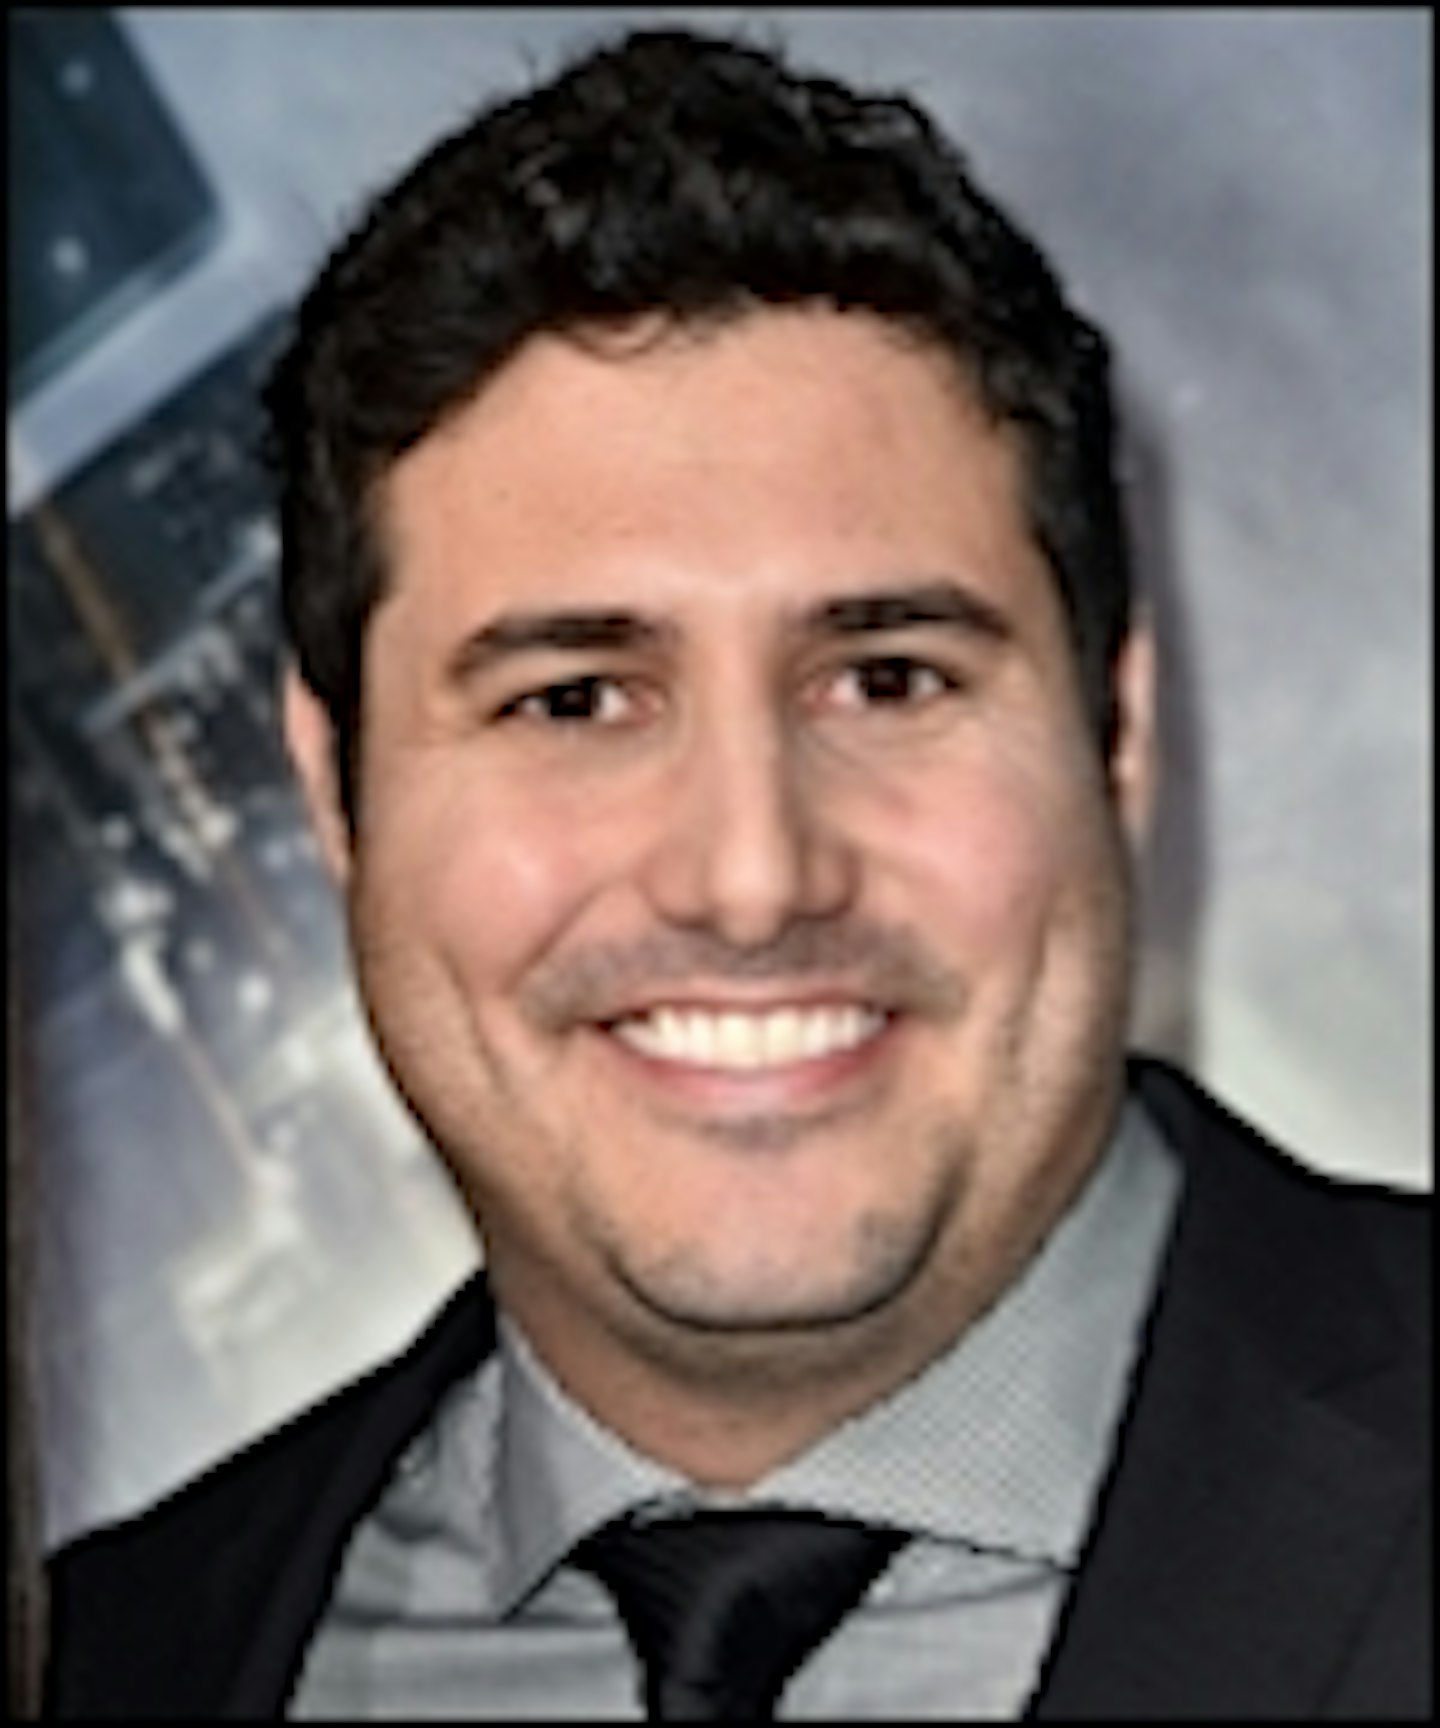 Dean Israelite Tapped To Direct Power Rangers